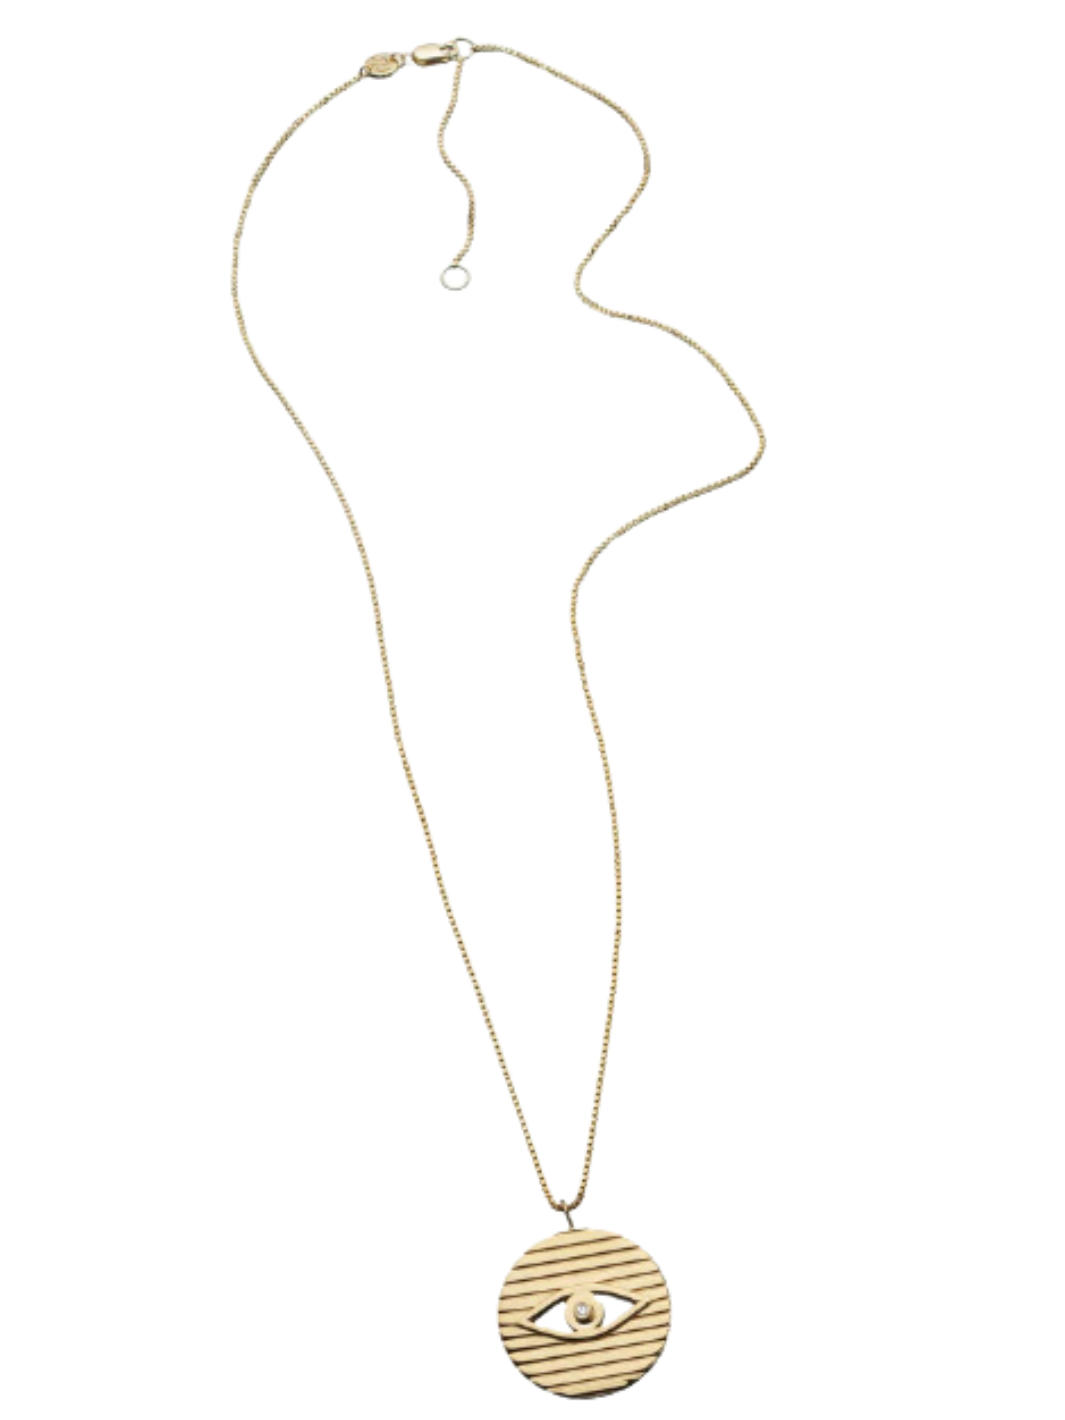 STASSI NECKLACE IN GOLD - Romi Boutique